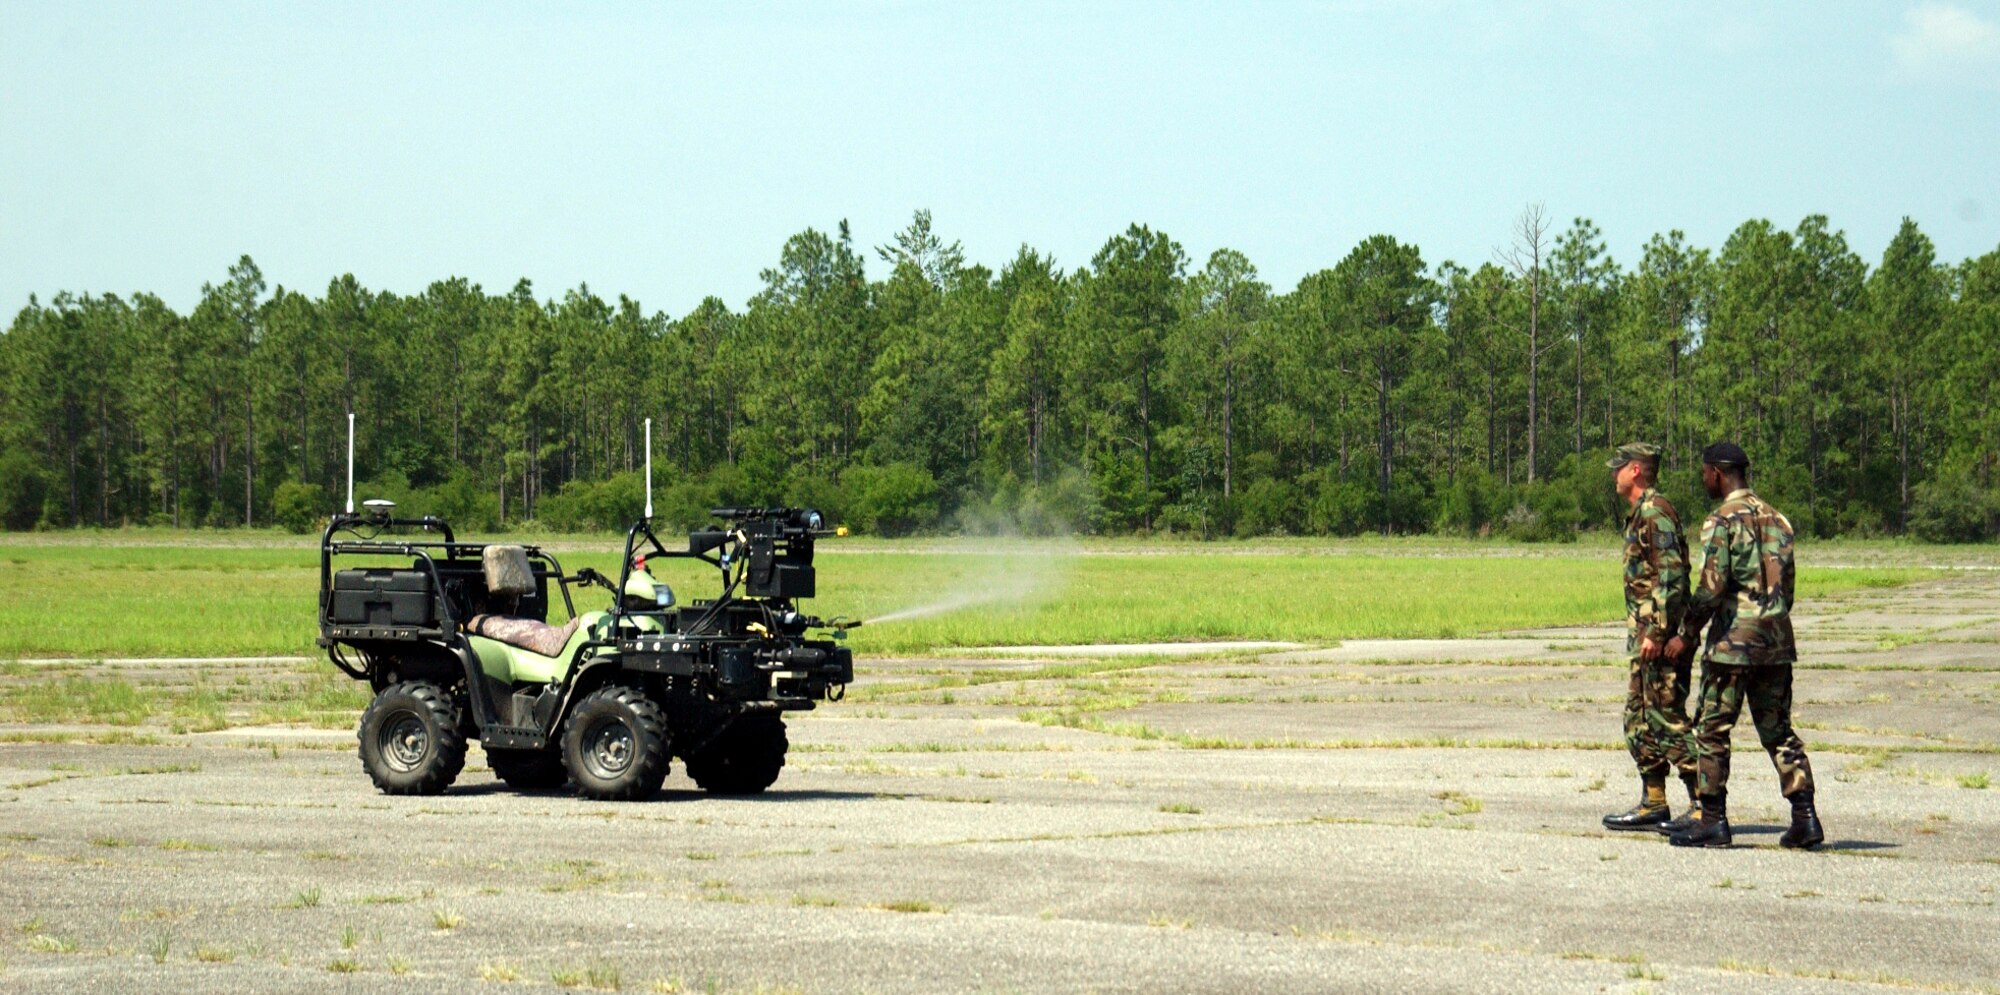 EGLIN AIR FORCE BASE, Fla. -- Troops stand back as the Scout robotic vehicle fires pepper spray during a demonstration June 22.  The robot is also armed with an M-16A2 rifle which is controlled from a remote location.  (U.S. Air Force photo by Gary Emery)